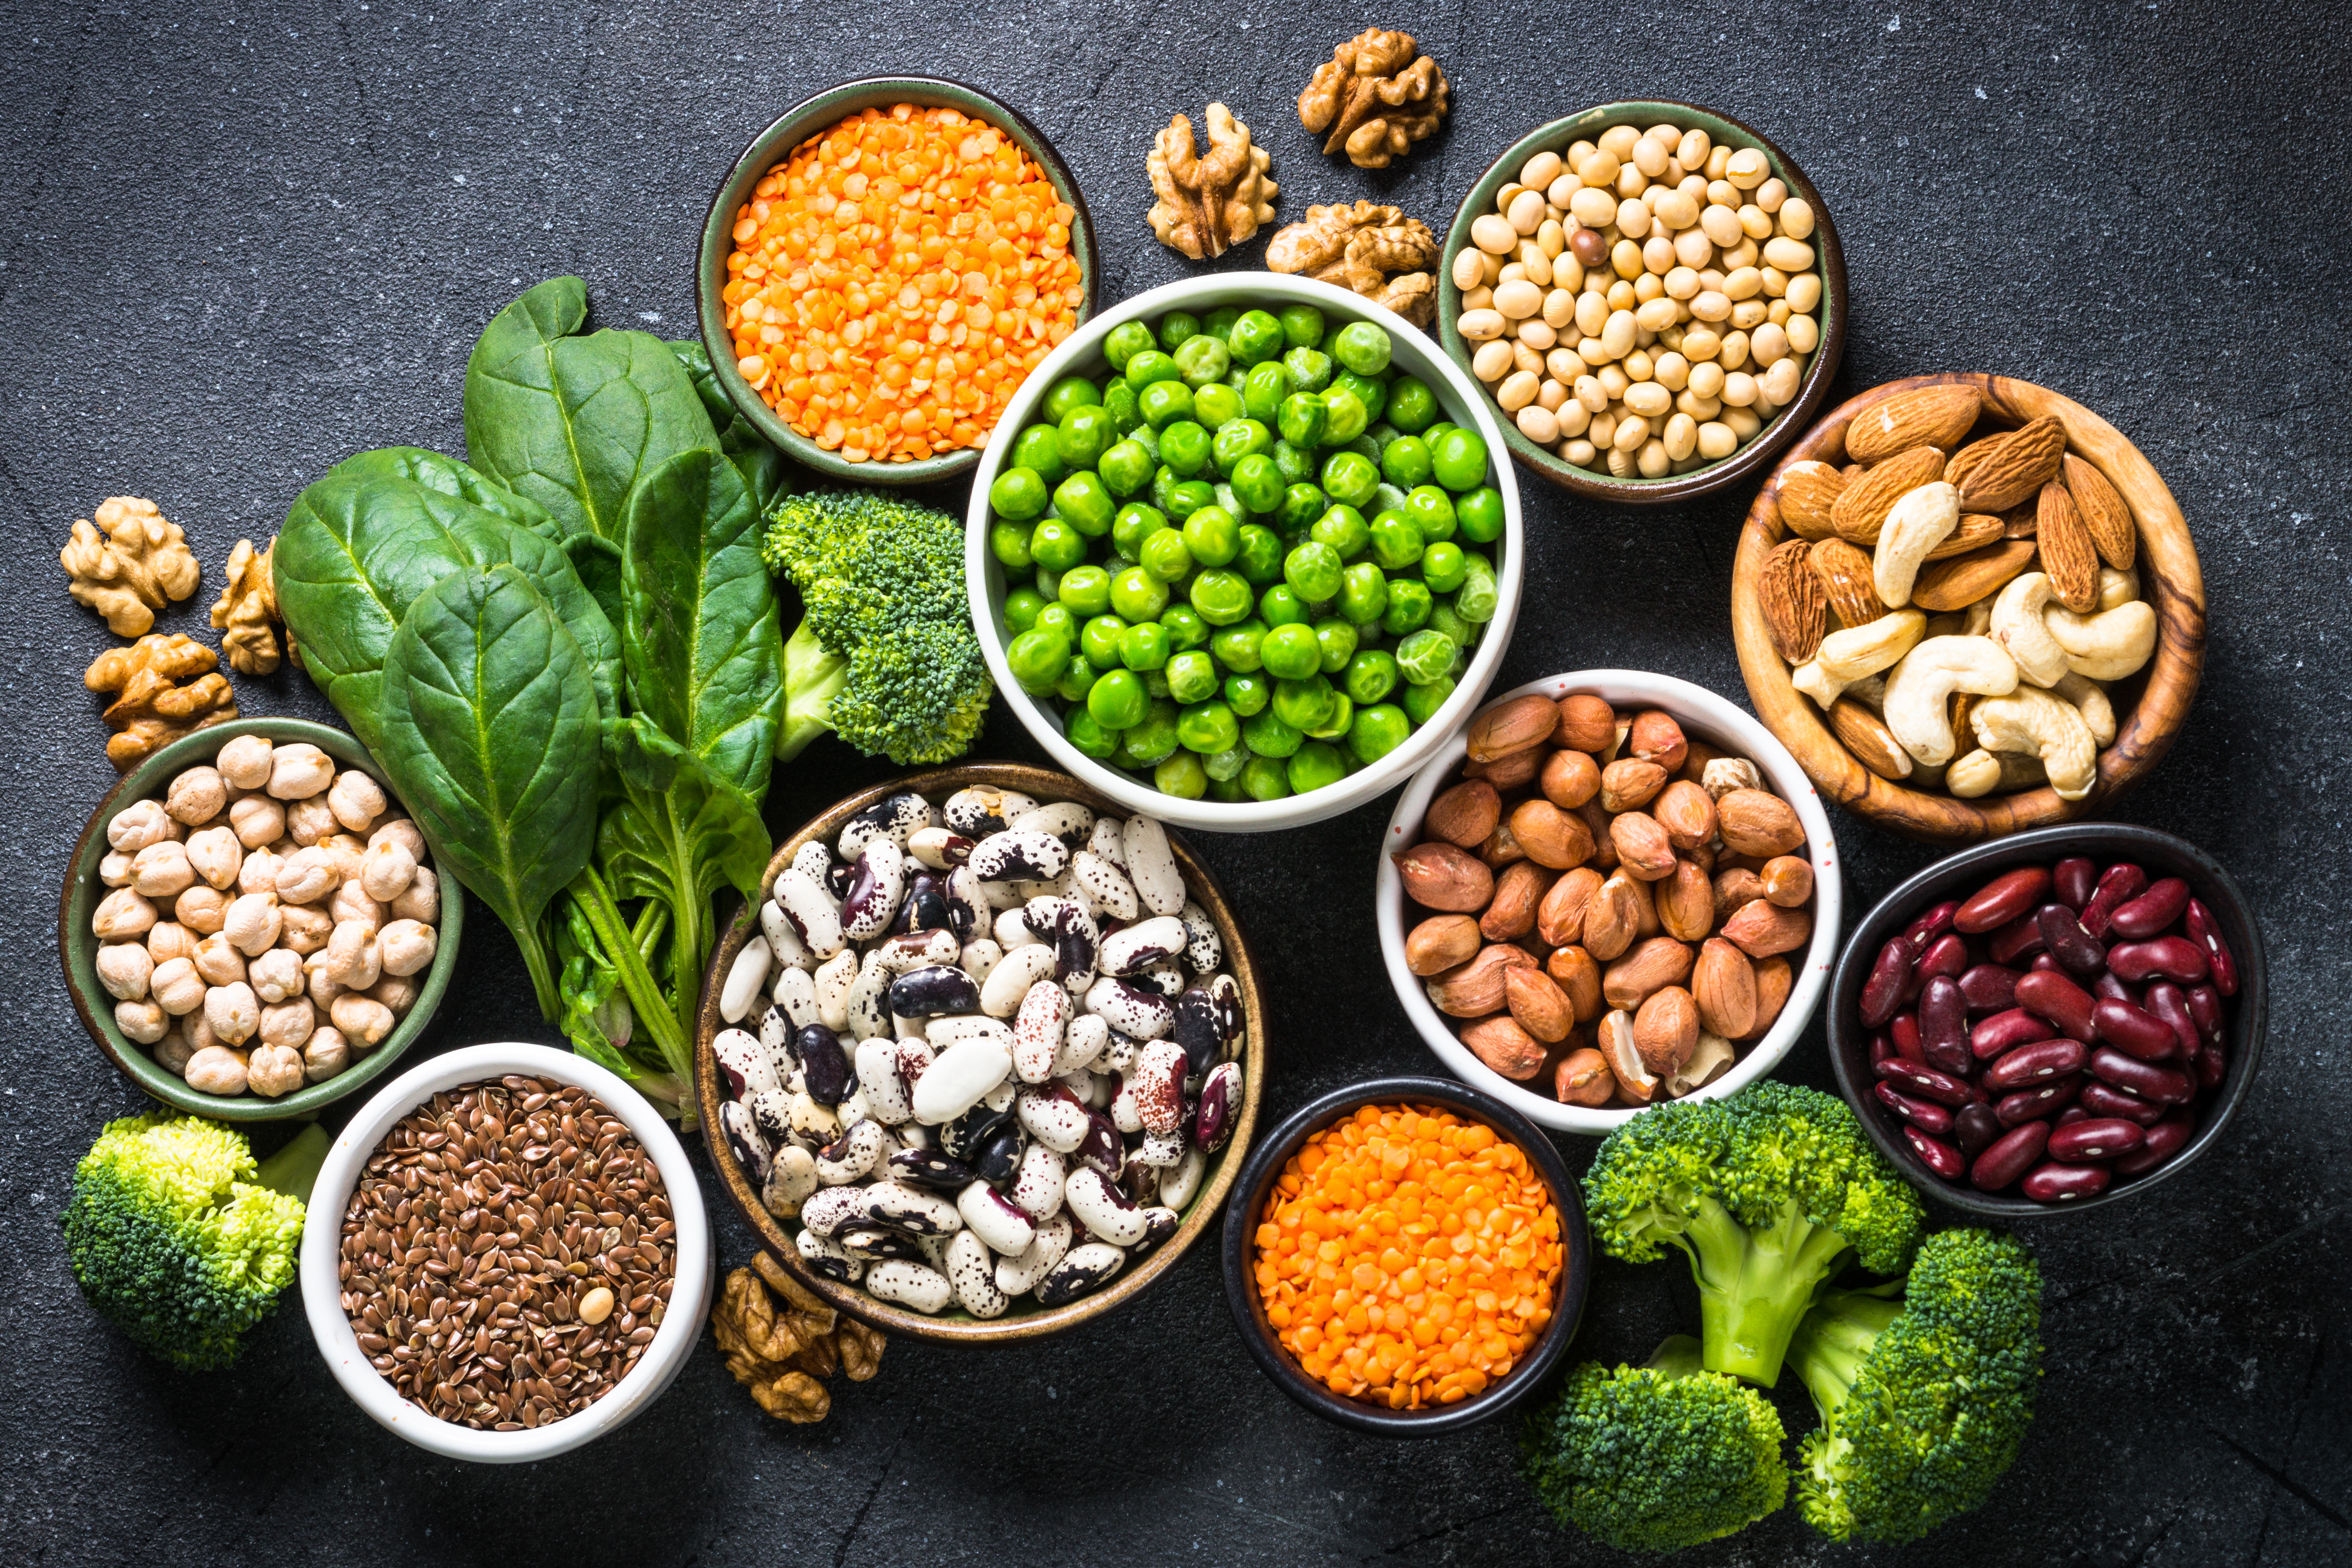 Plant-based: What’s new, what’s next – an expanding opportunity [On-demand webinar]